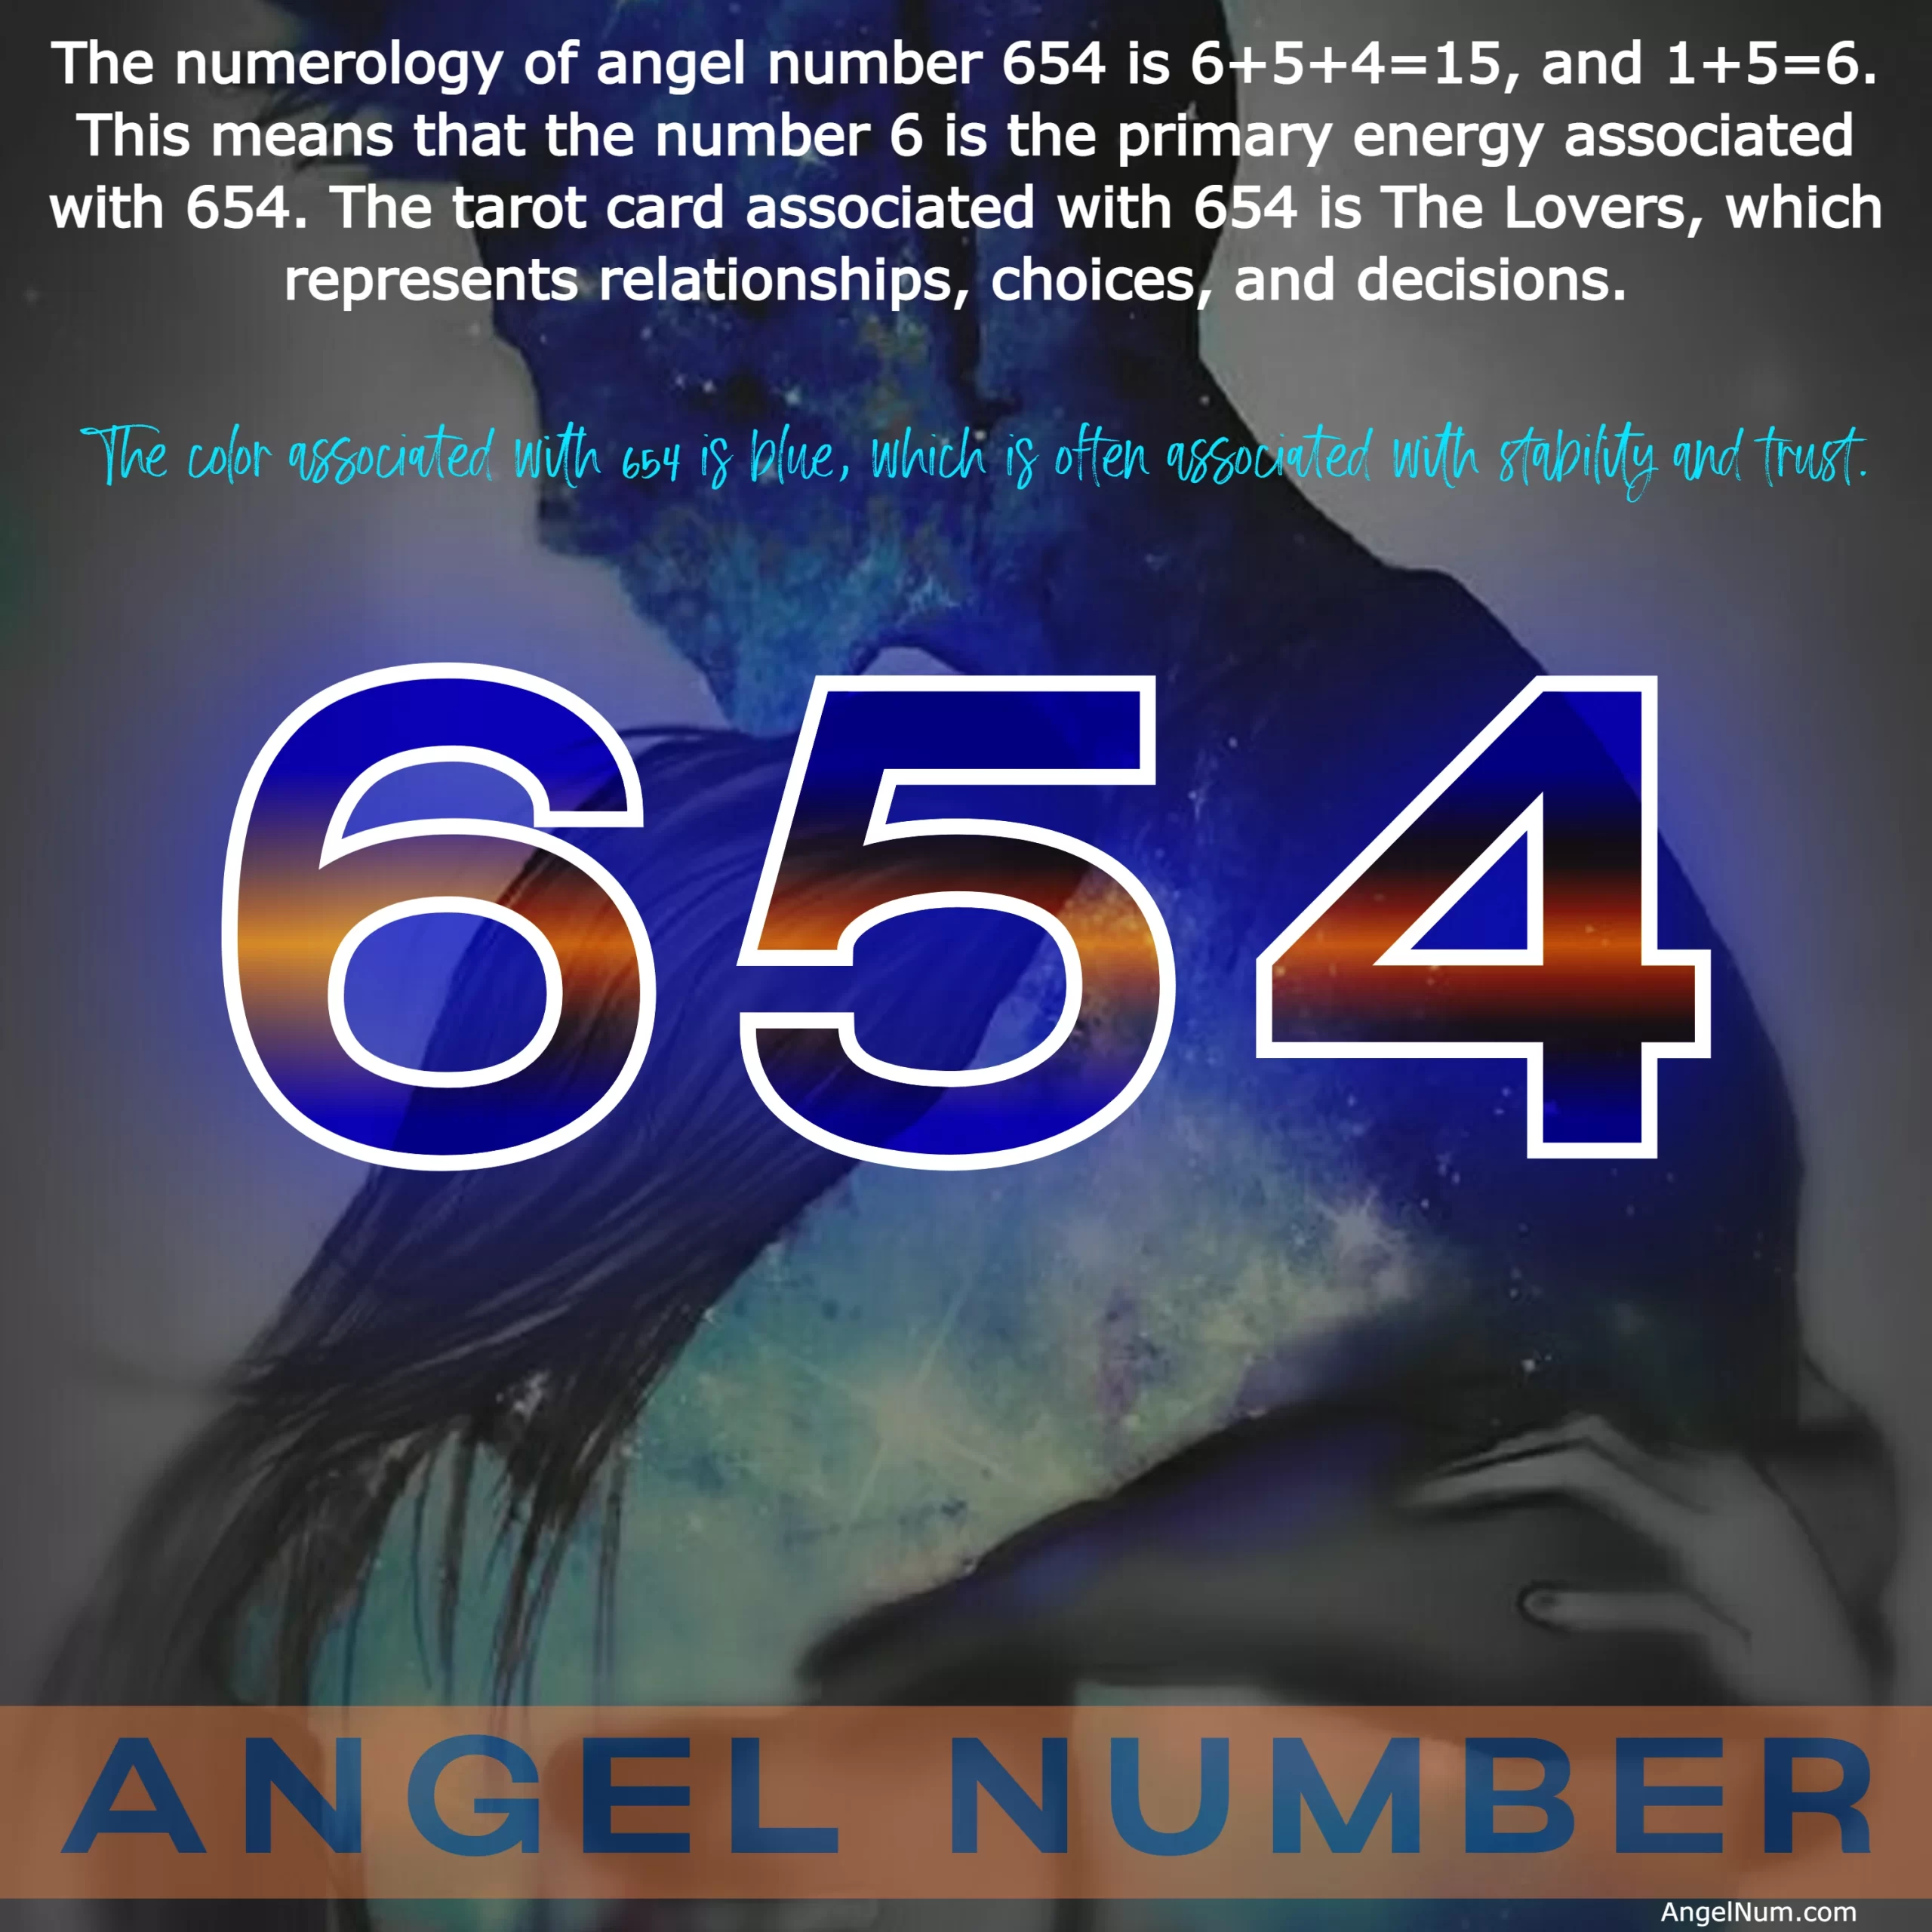 Angel Number 654: Meaning, Symbolism, and Significance